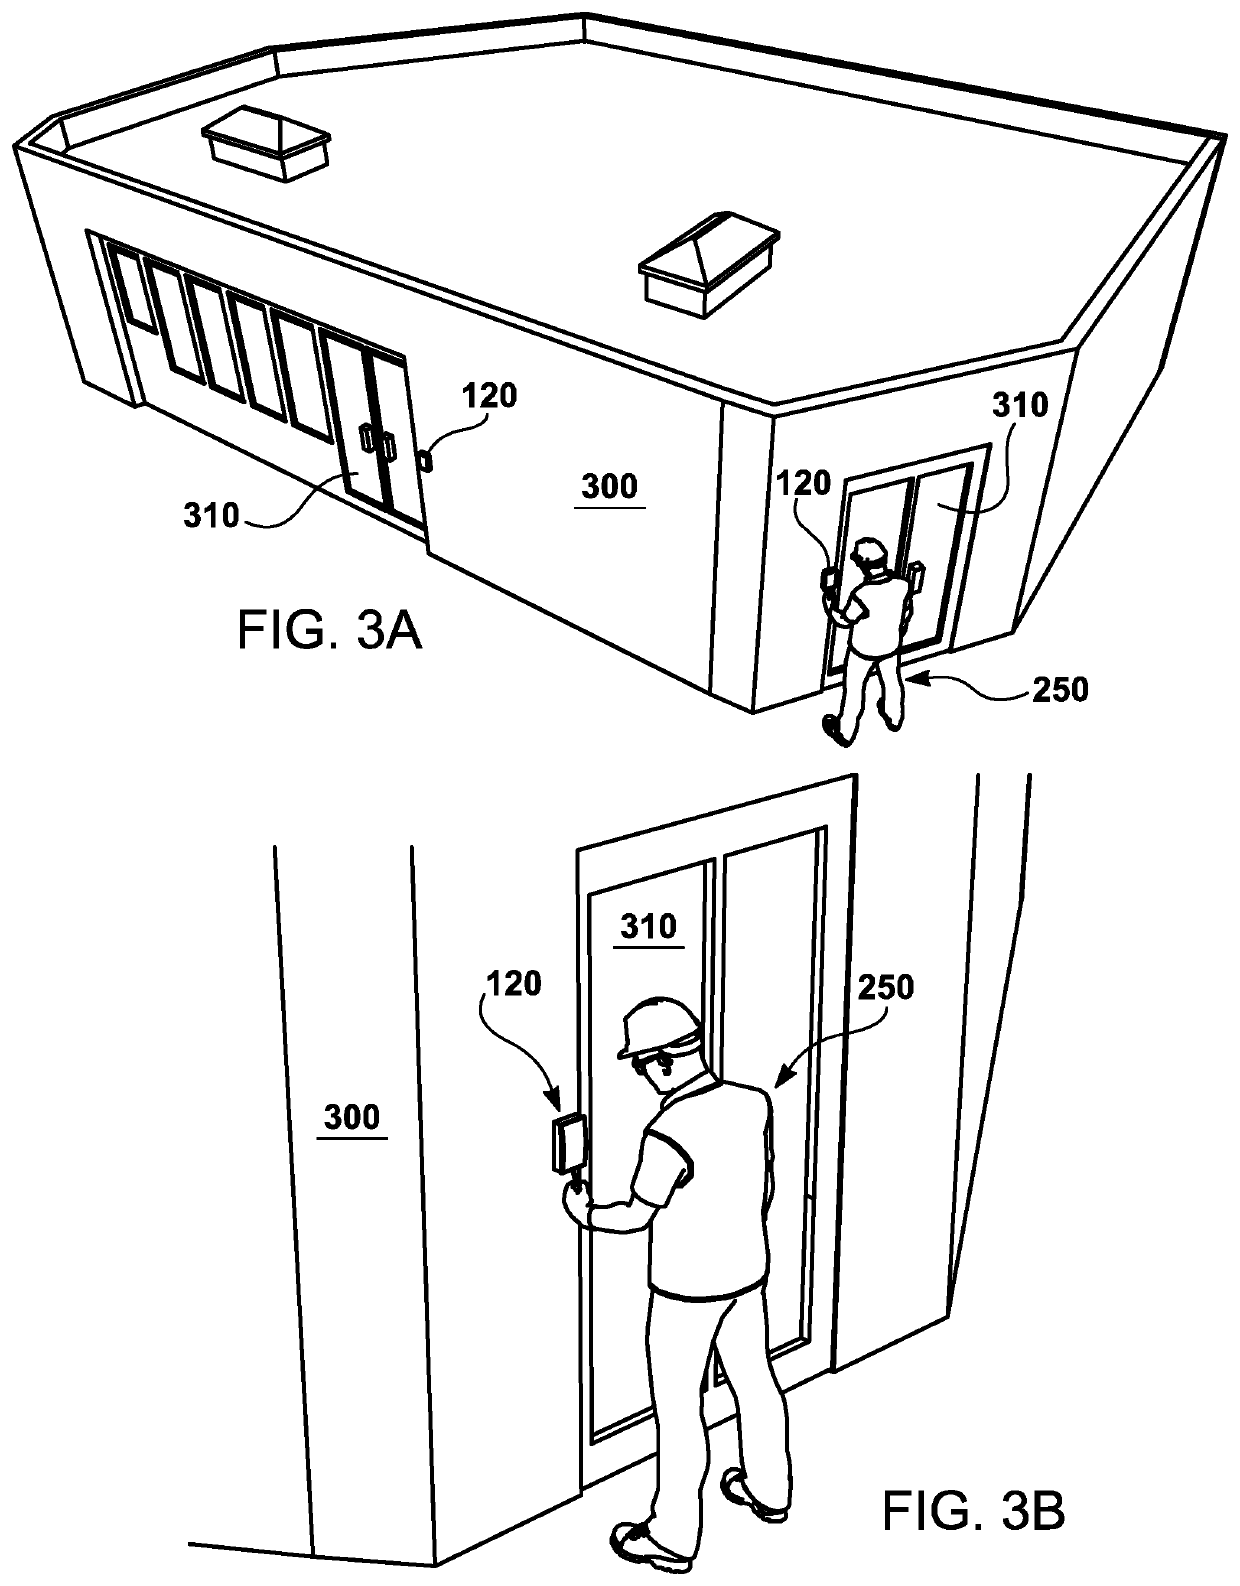 Anti-Tampering Switch for Electronic Access Control Readers